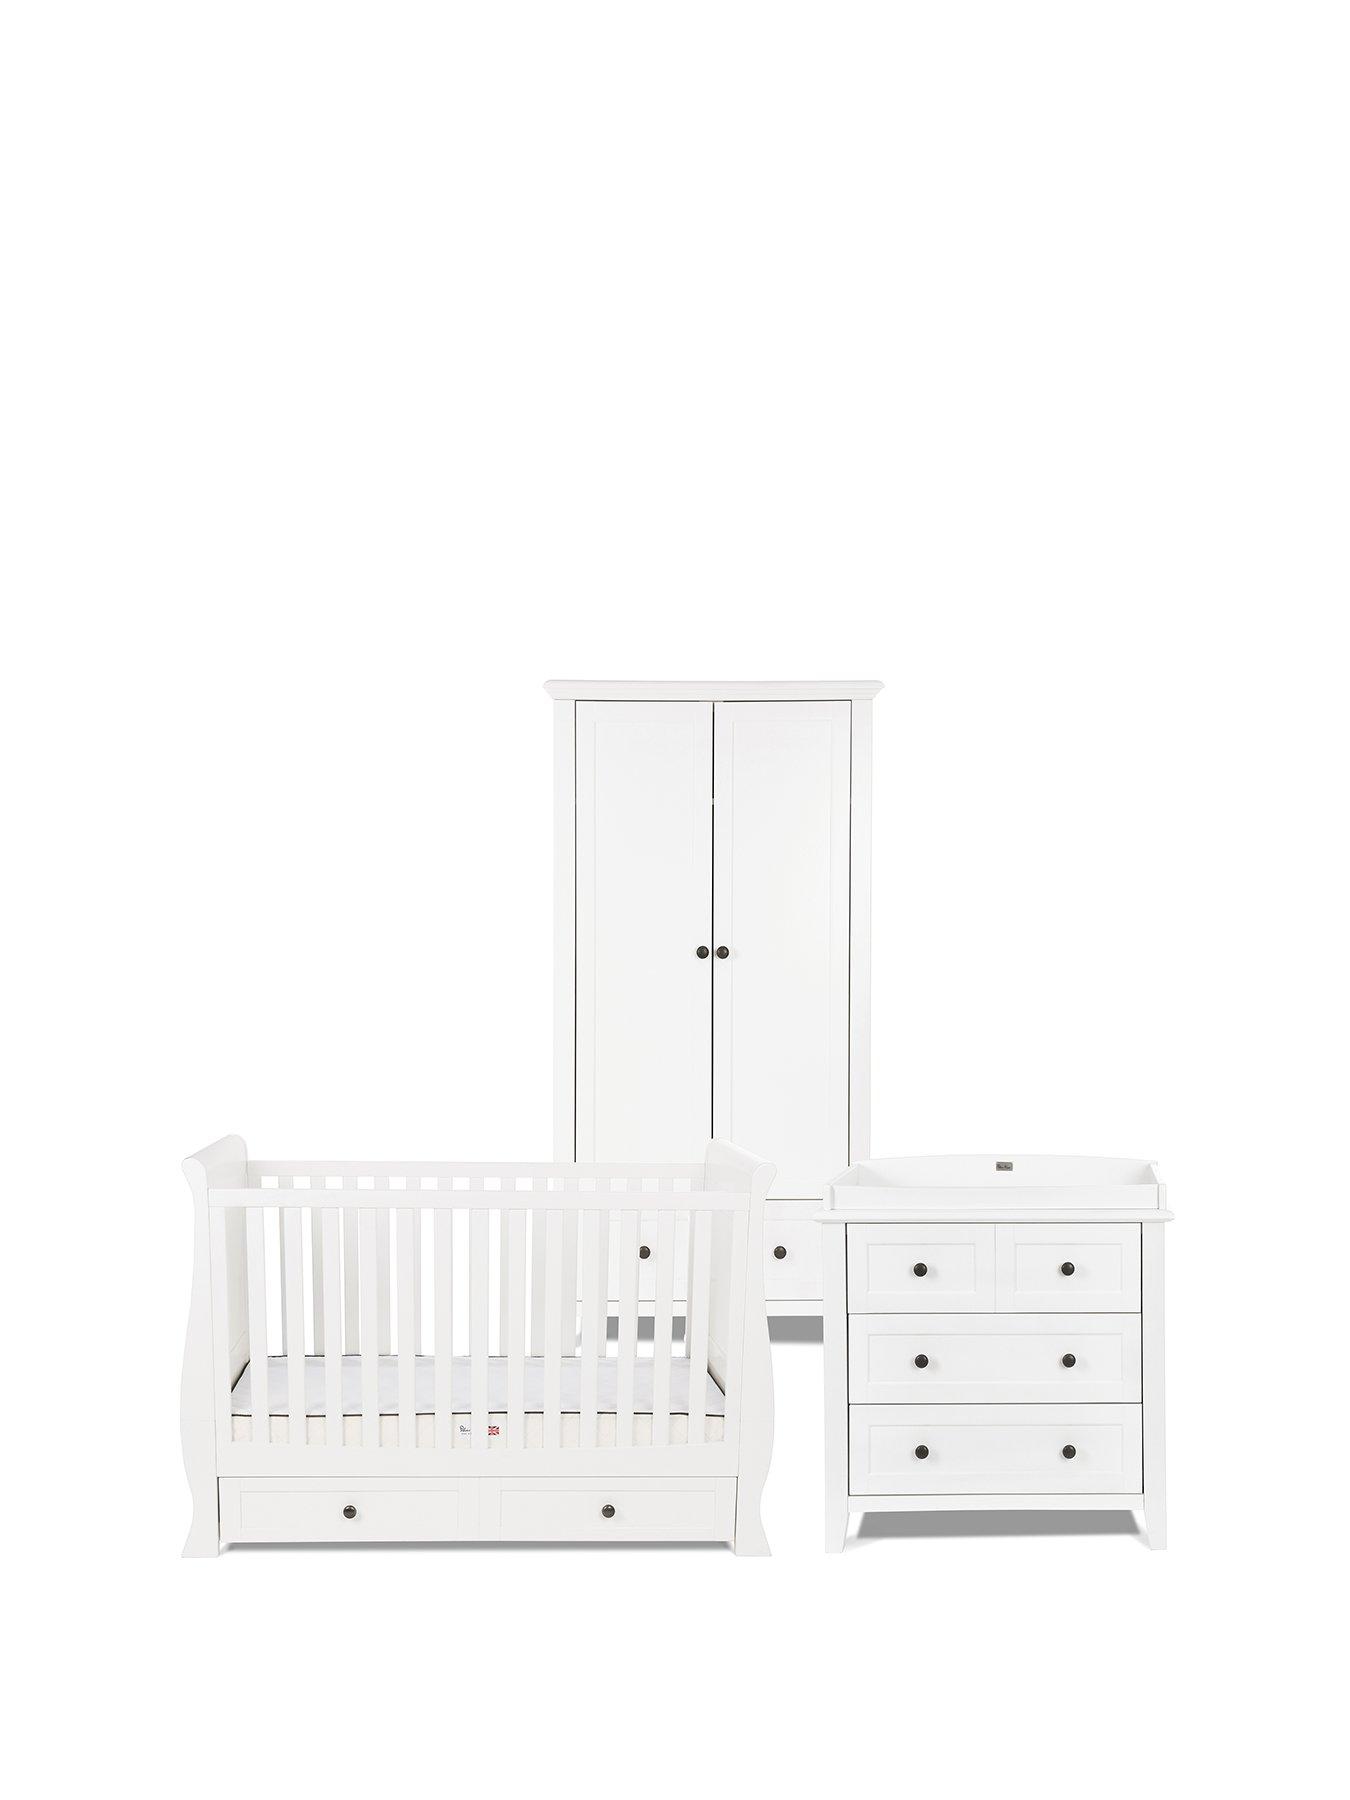 changing table and wardrobe set